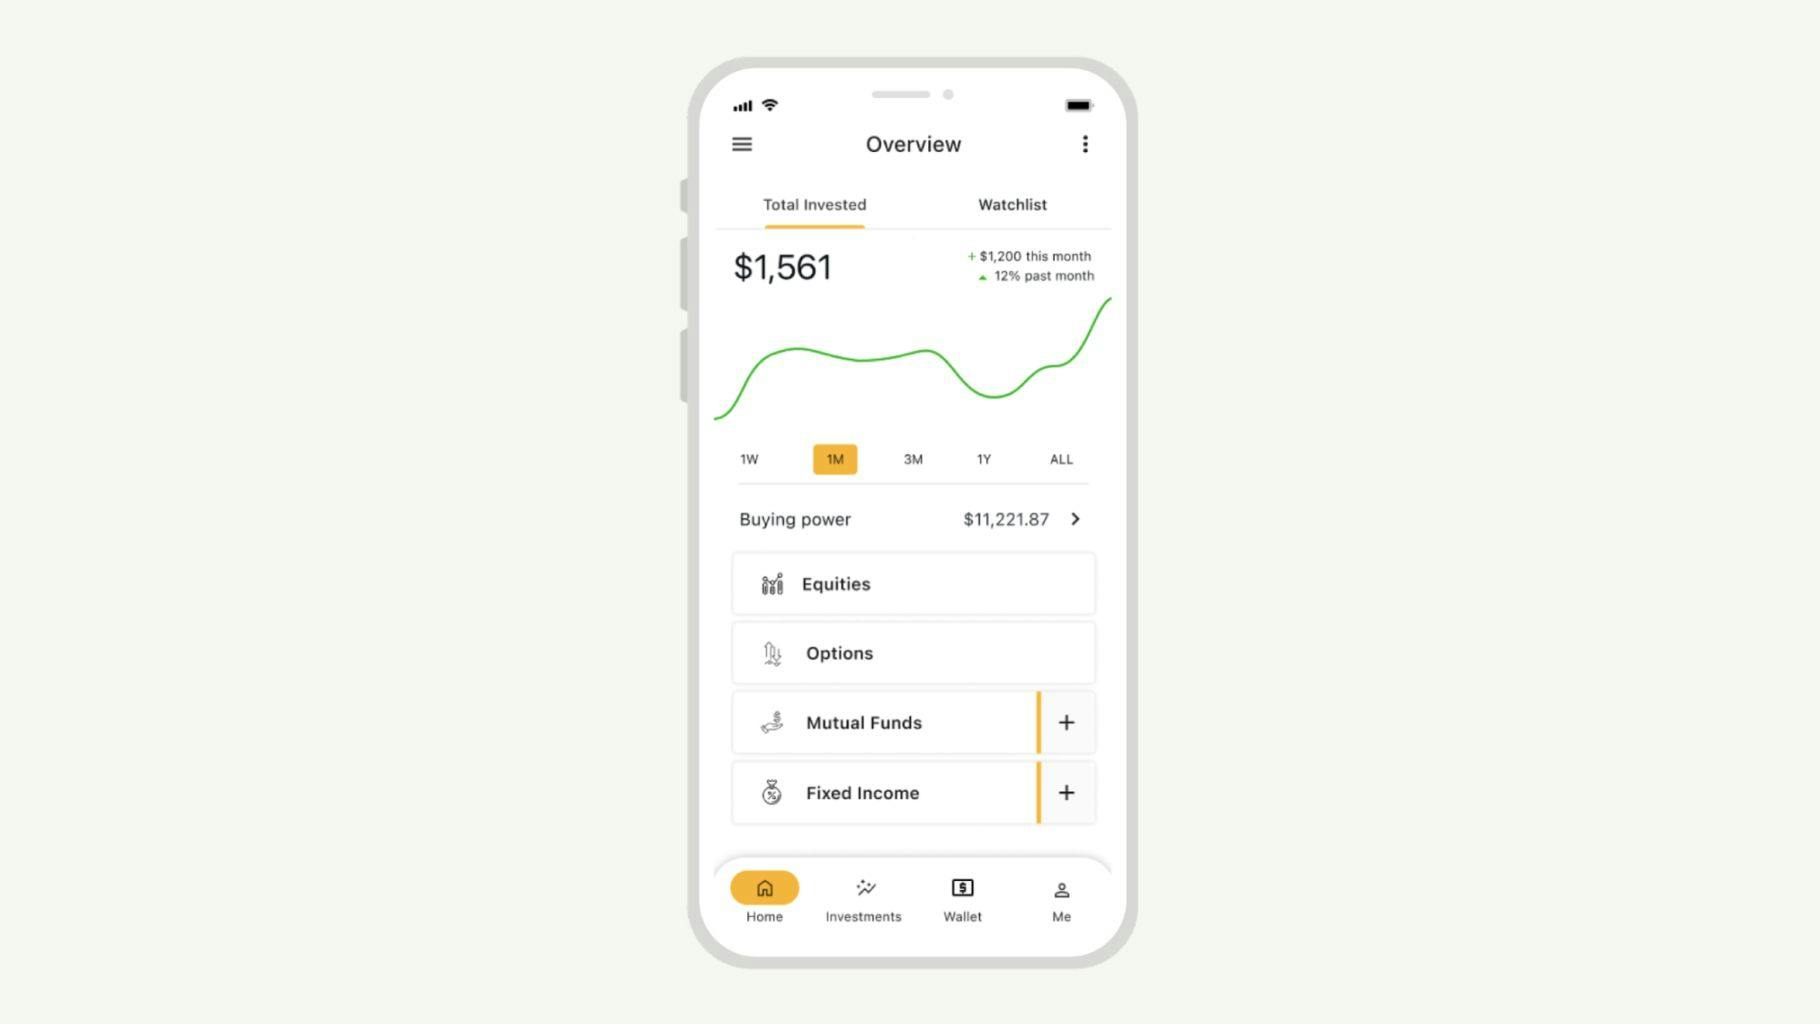 An image of the DriveWealth app